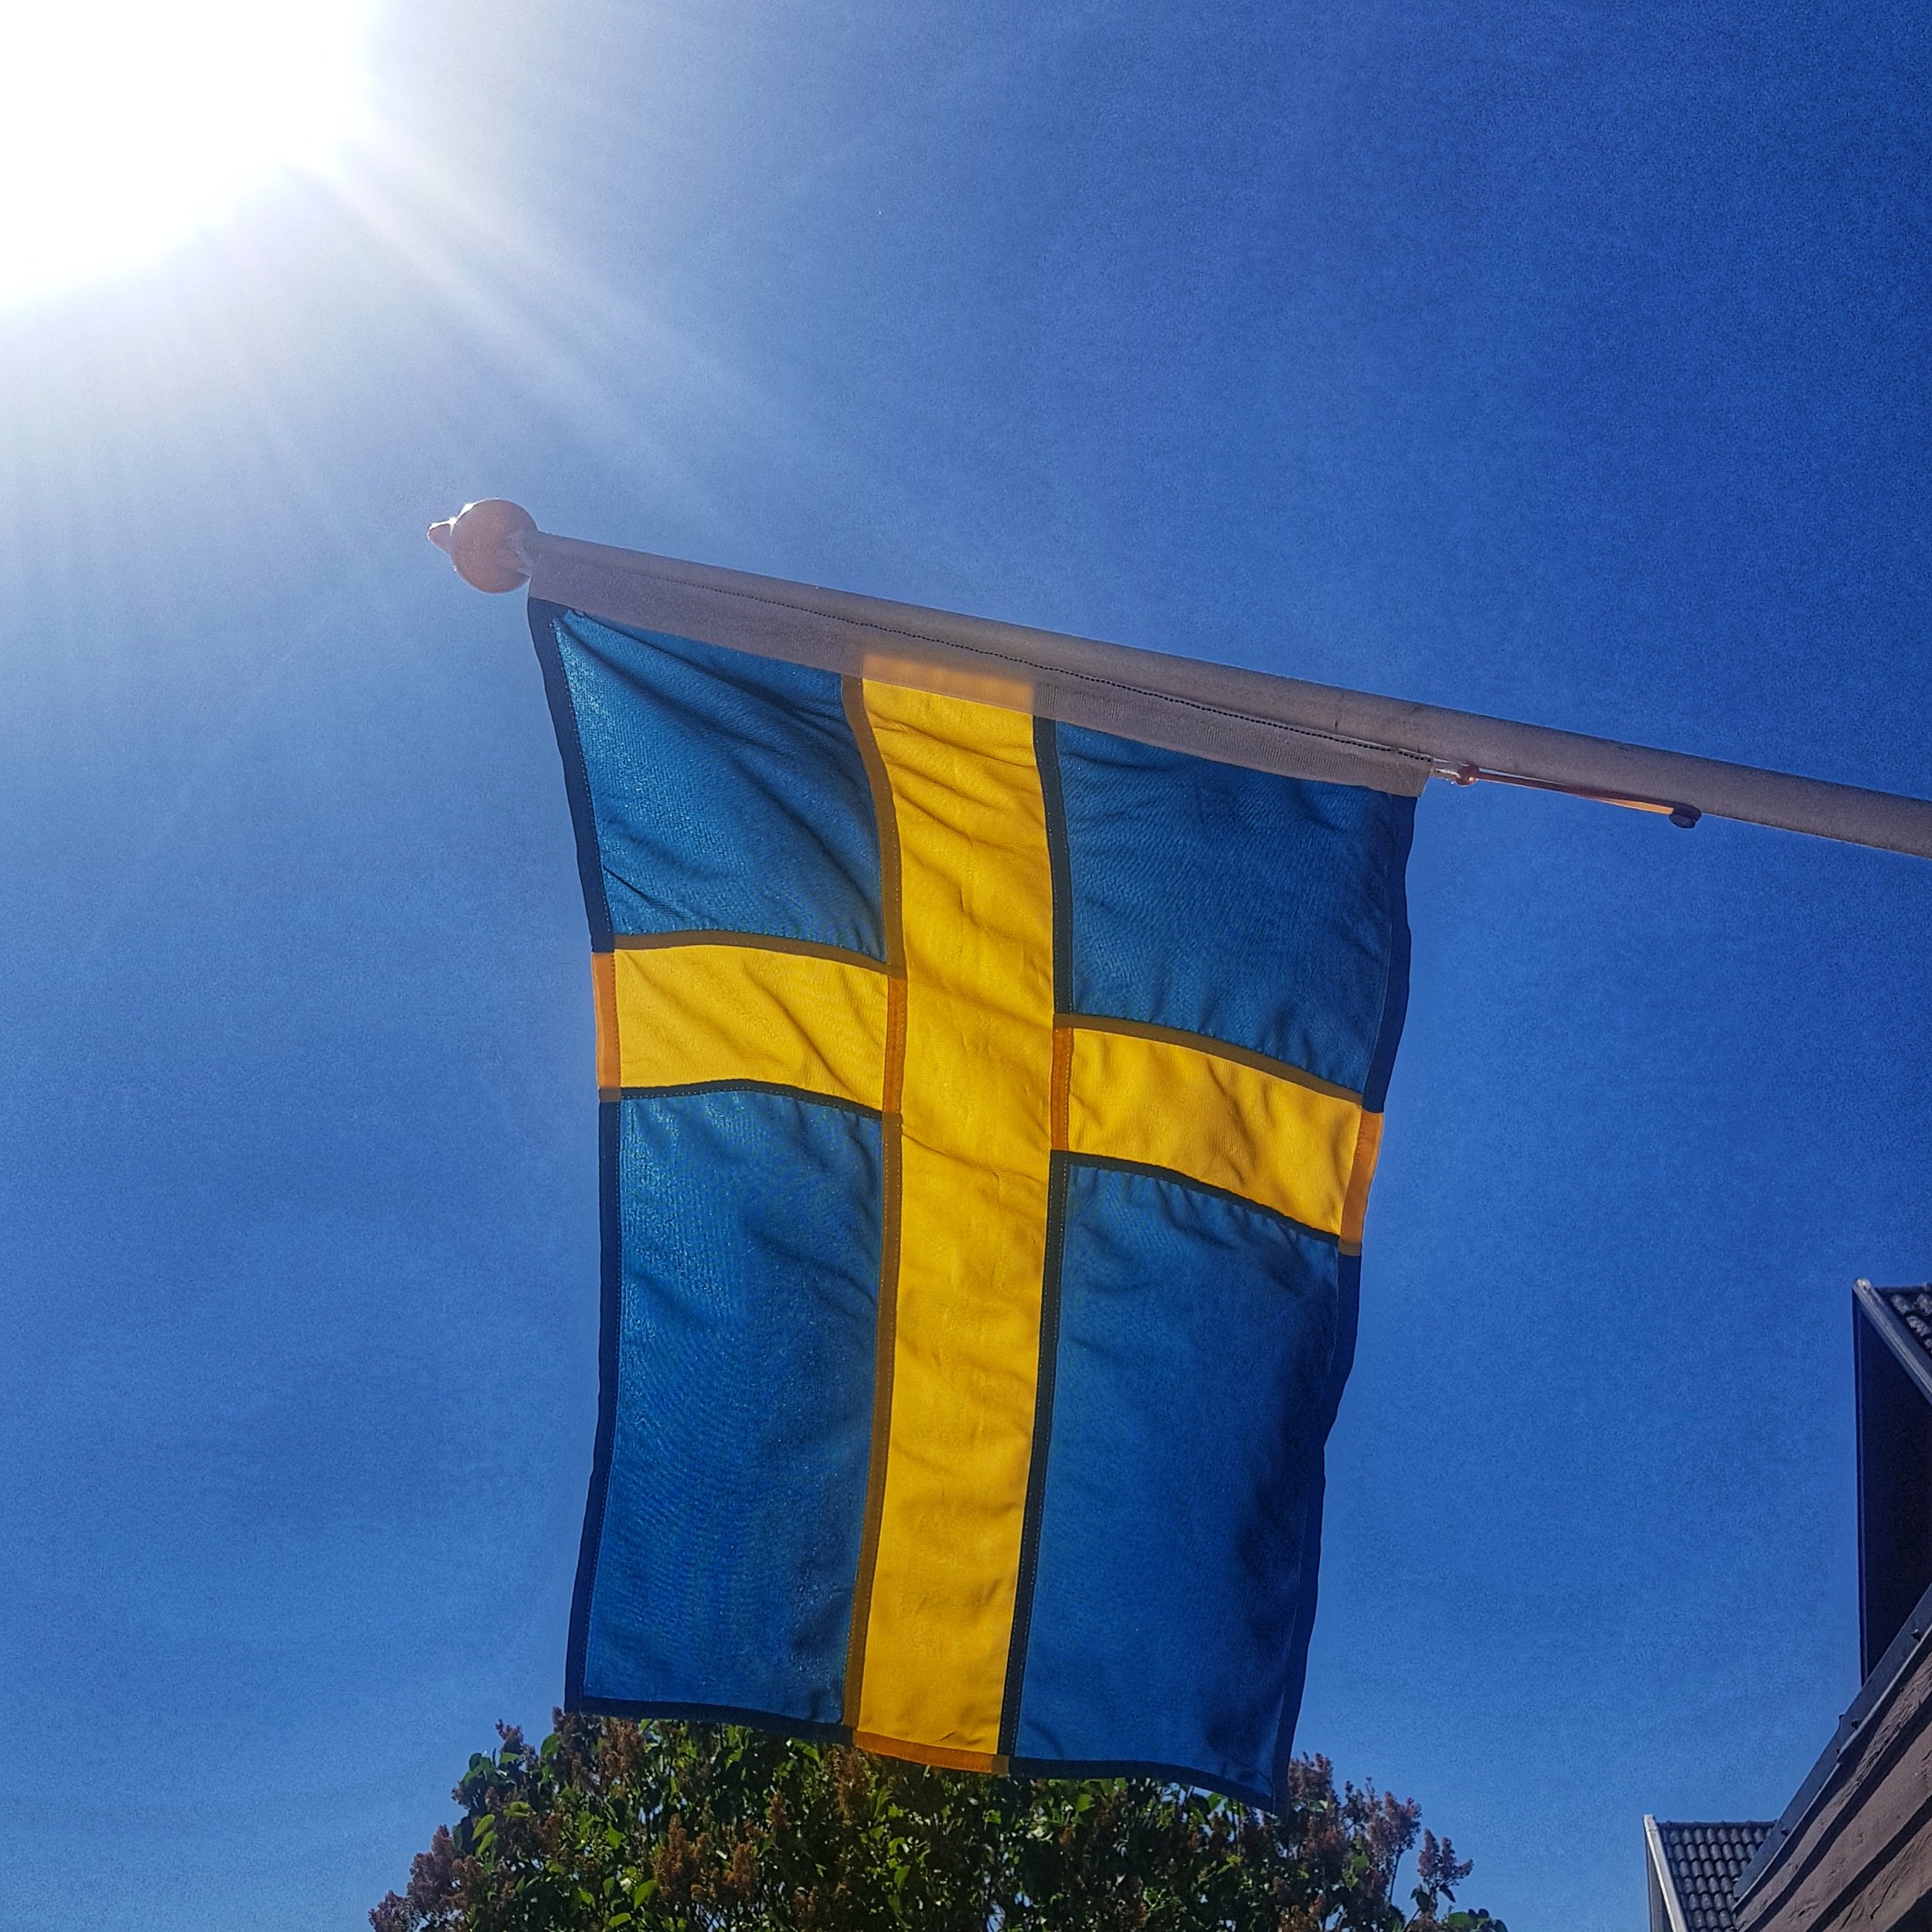 Day 157 - June 06: Sweden's Day